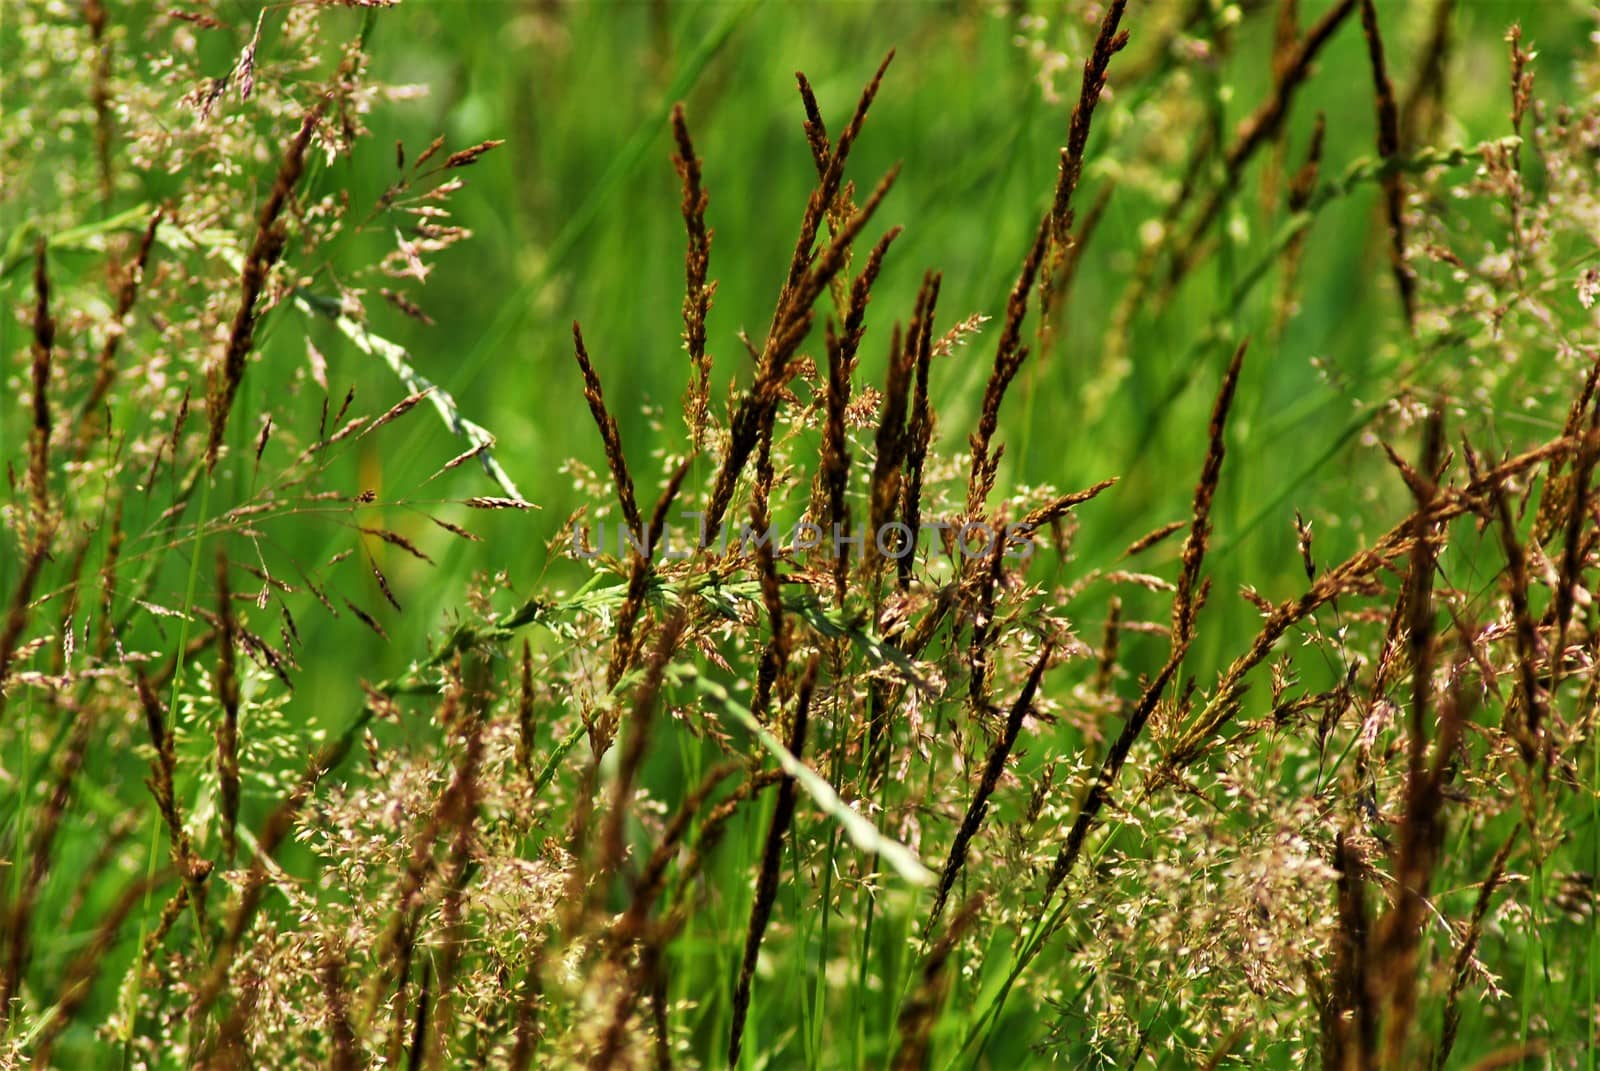 Some brown tall grasses against a green background